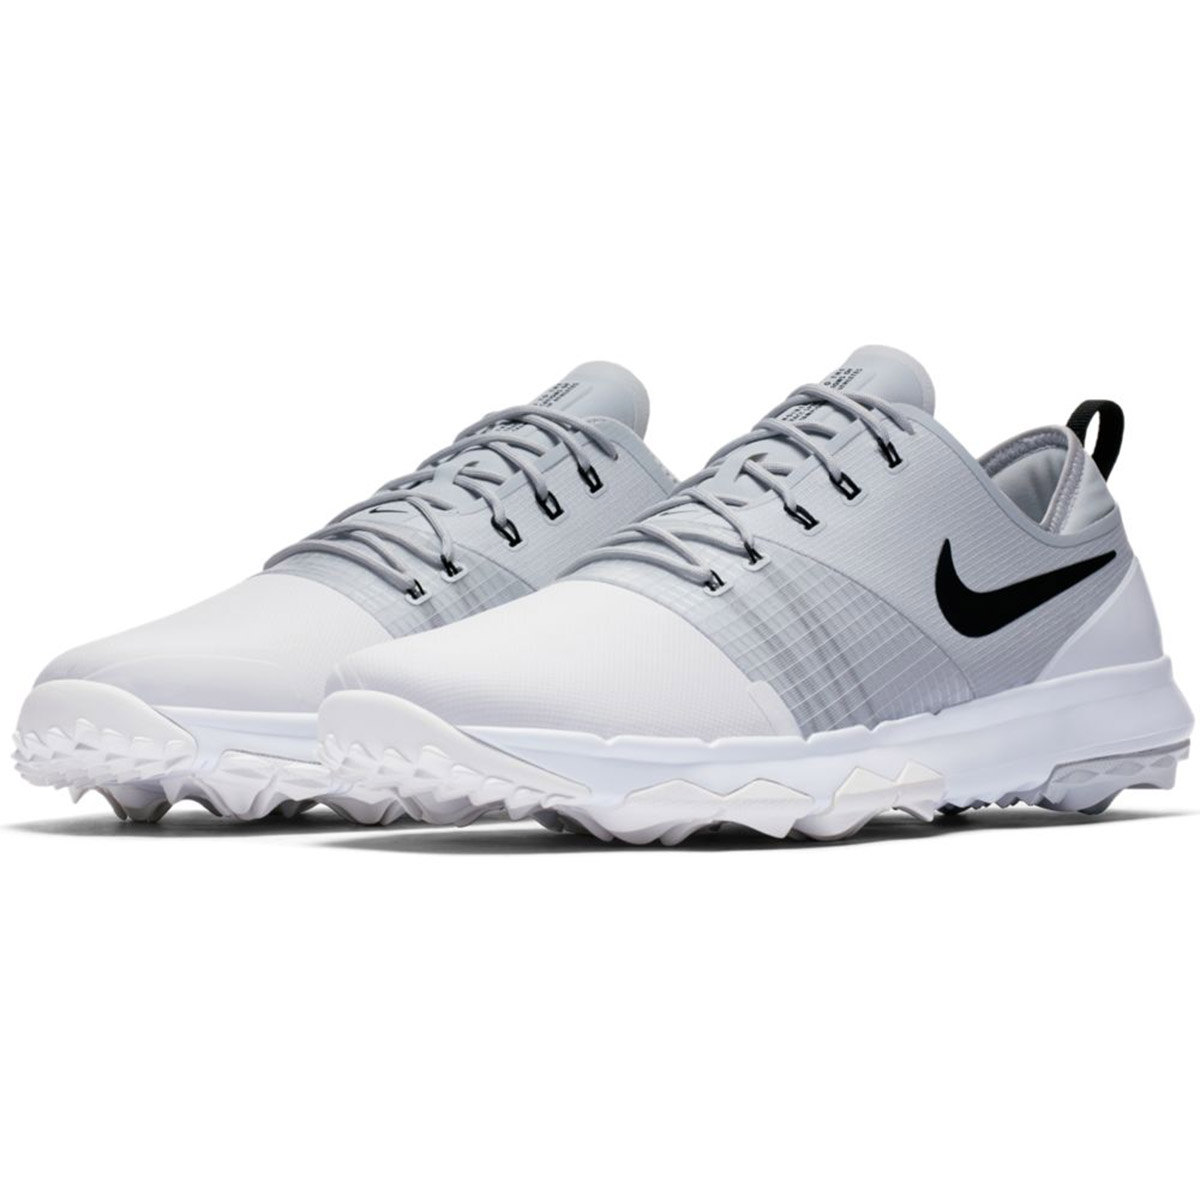 nike f1 impact 3 golf shoes online -